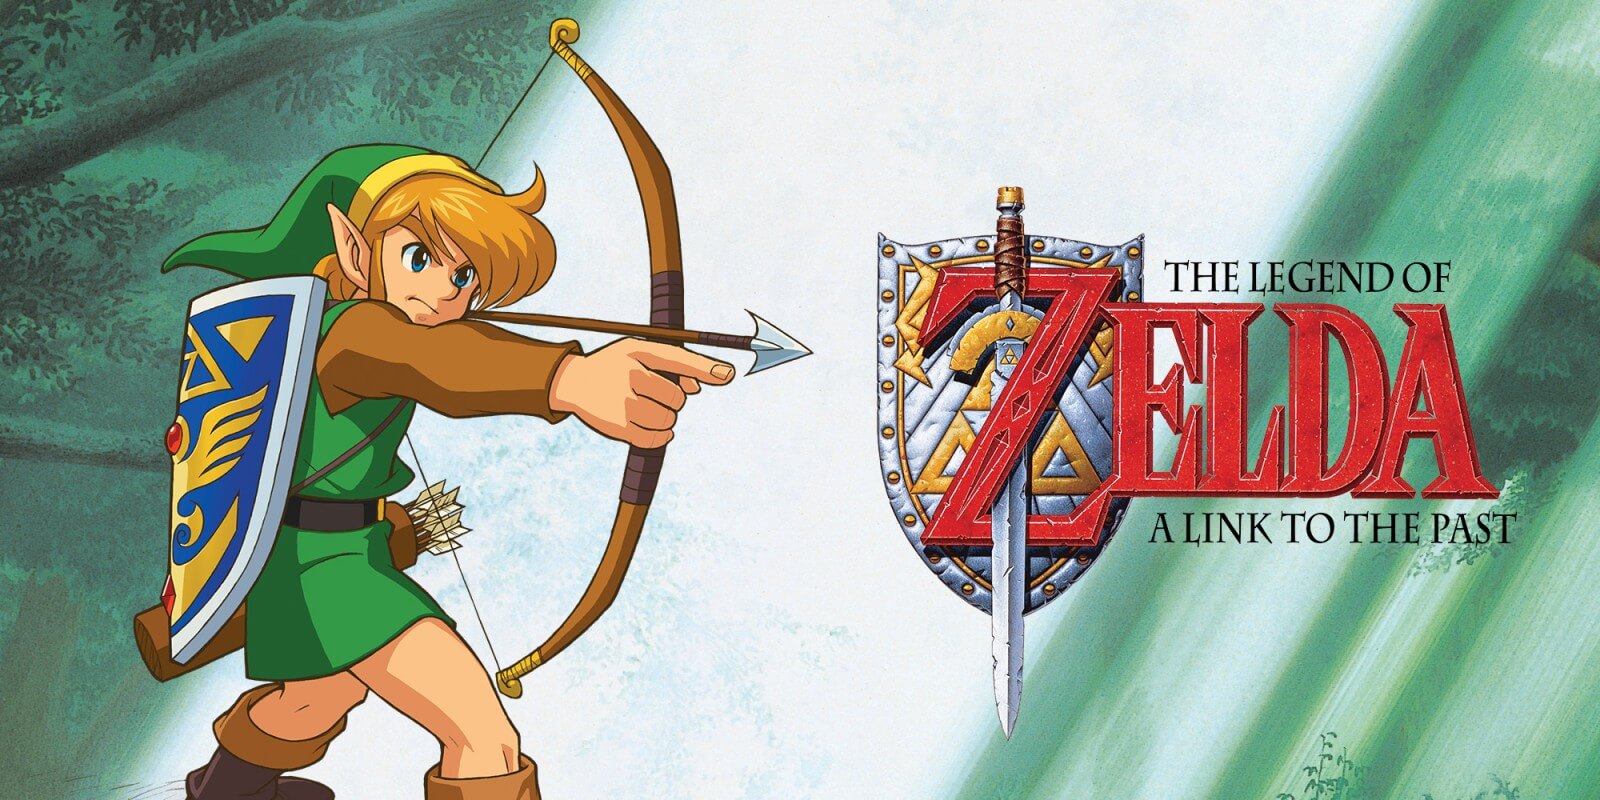 The Legend of Zelda A Link to the Past Guerra do Aprisionamento Hyrule Ocarina of Time Game